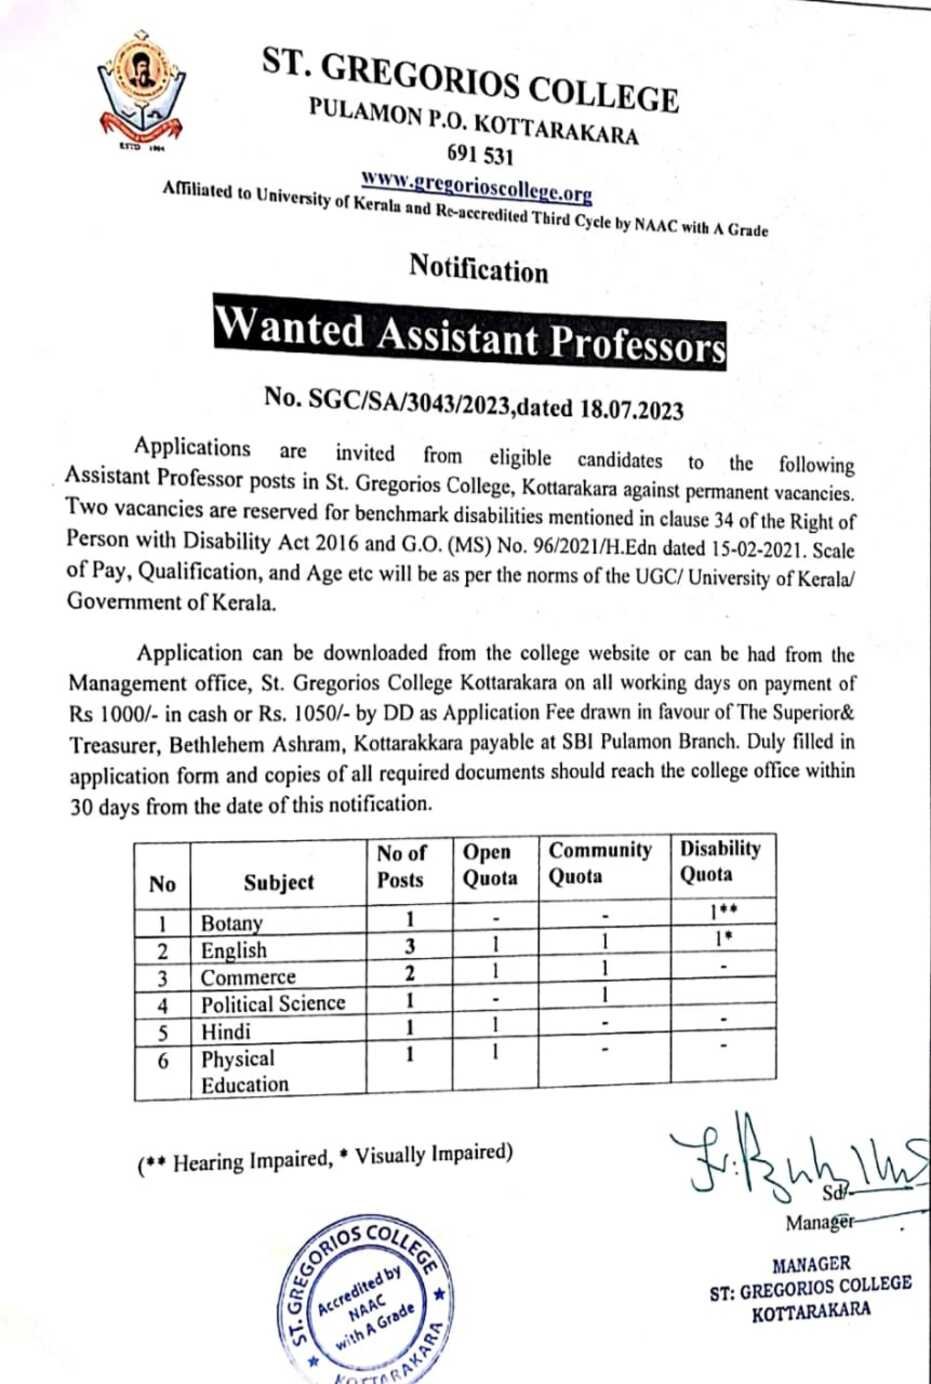 NOTIFICATION FOR THE POST ASSISTANT PROFESSORS